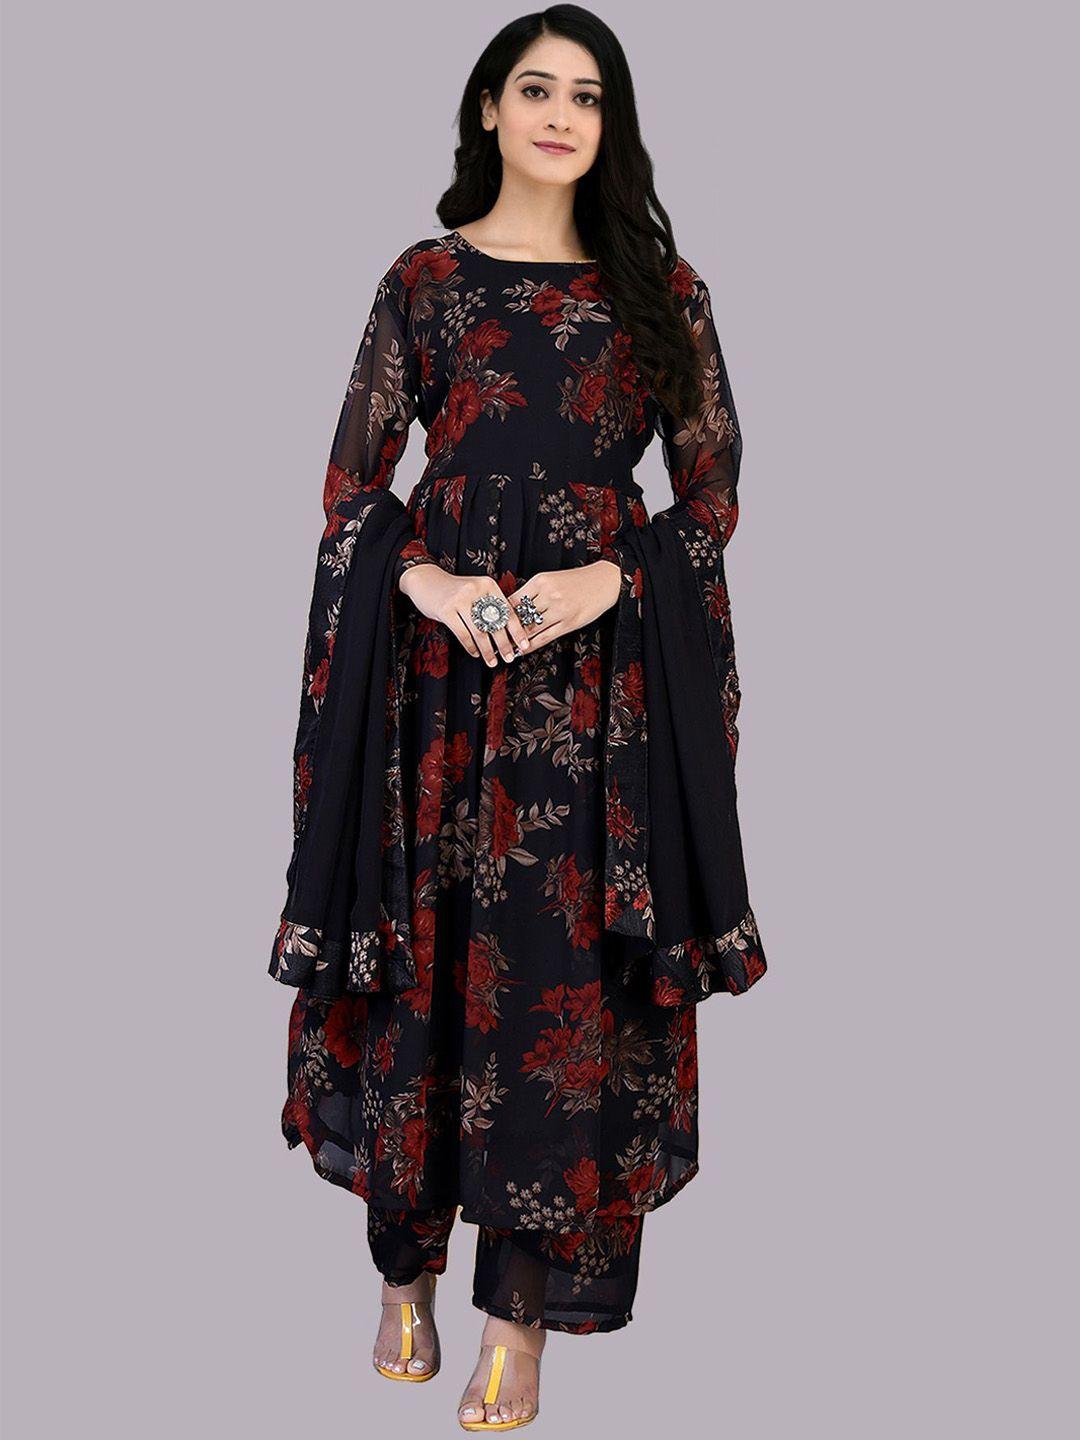 queenswear creation women black floral printed kurta with palazzos & with dupatta